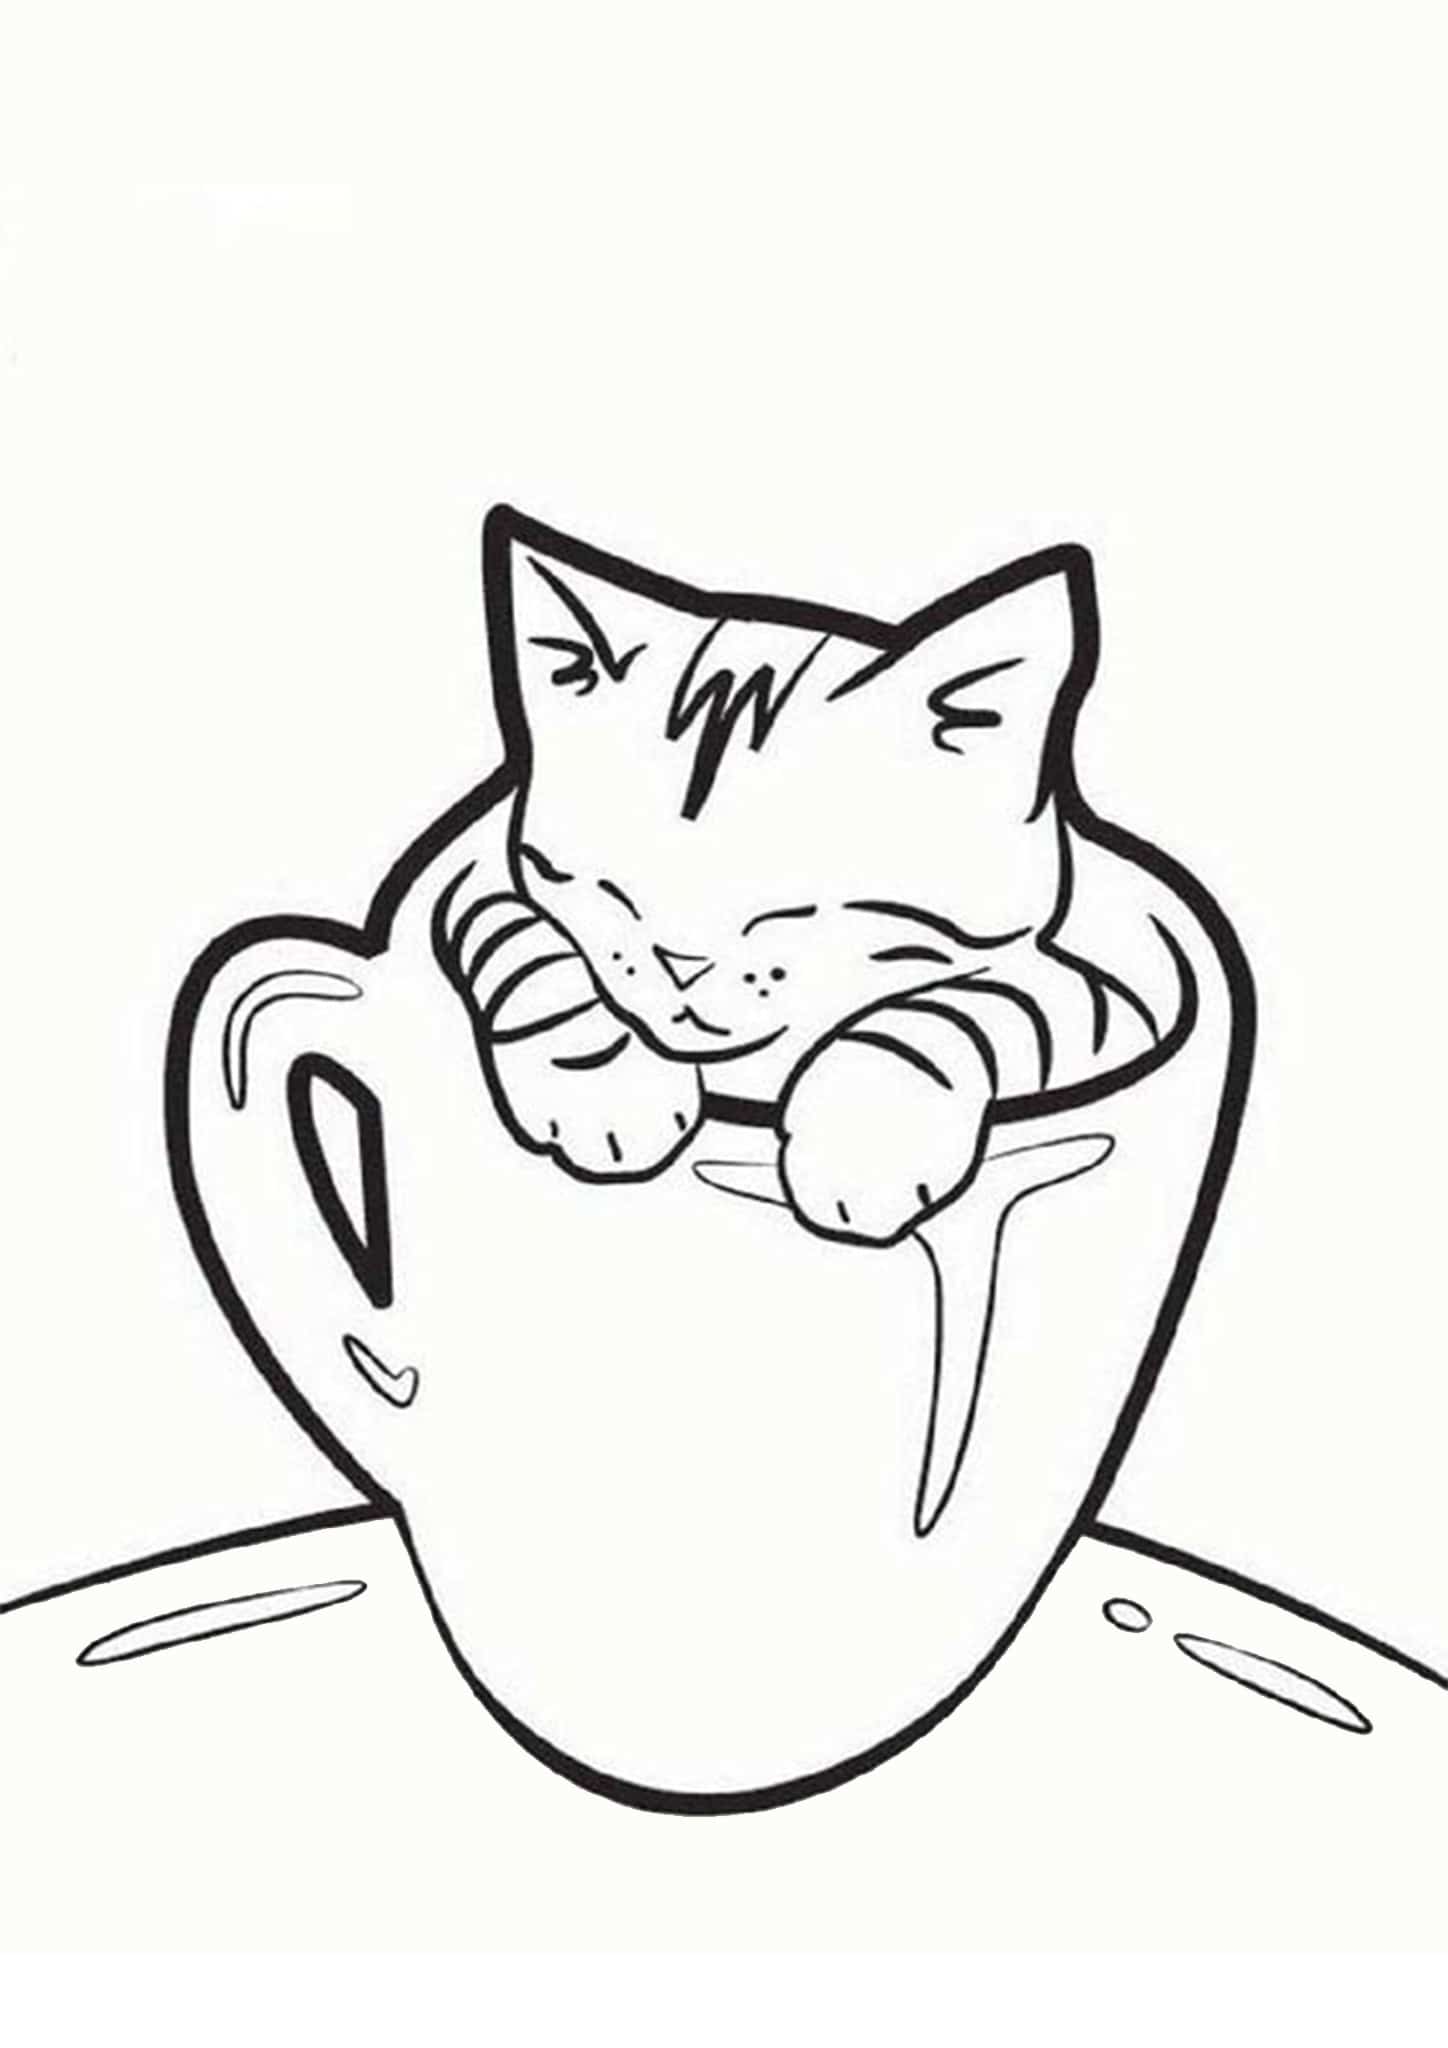 kittens-printable-coloring-pages